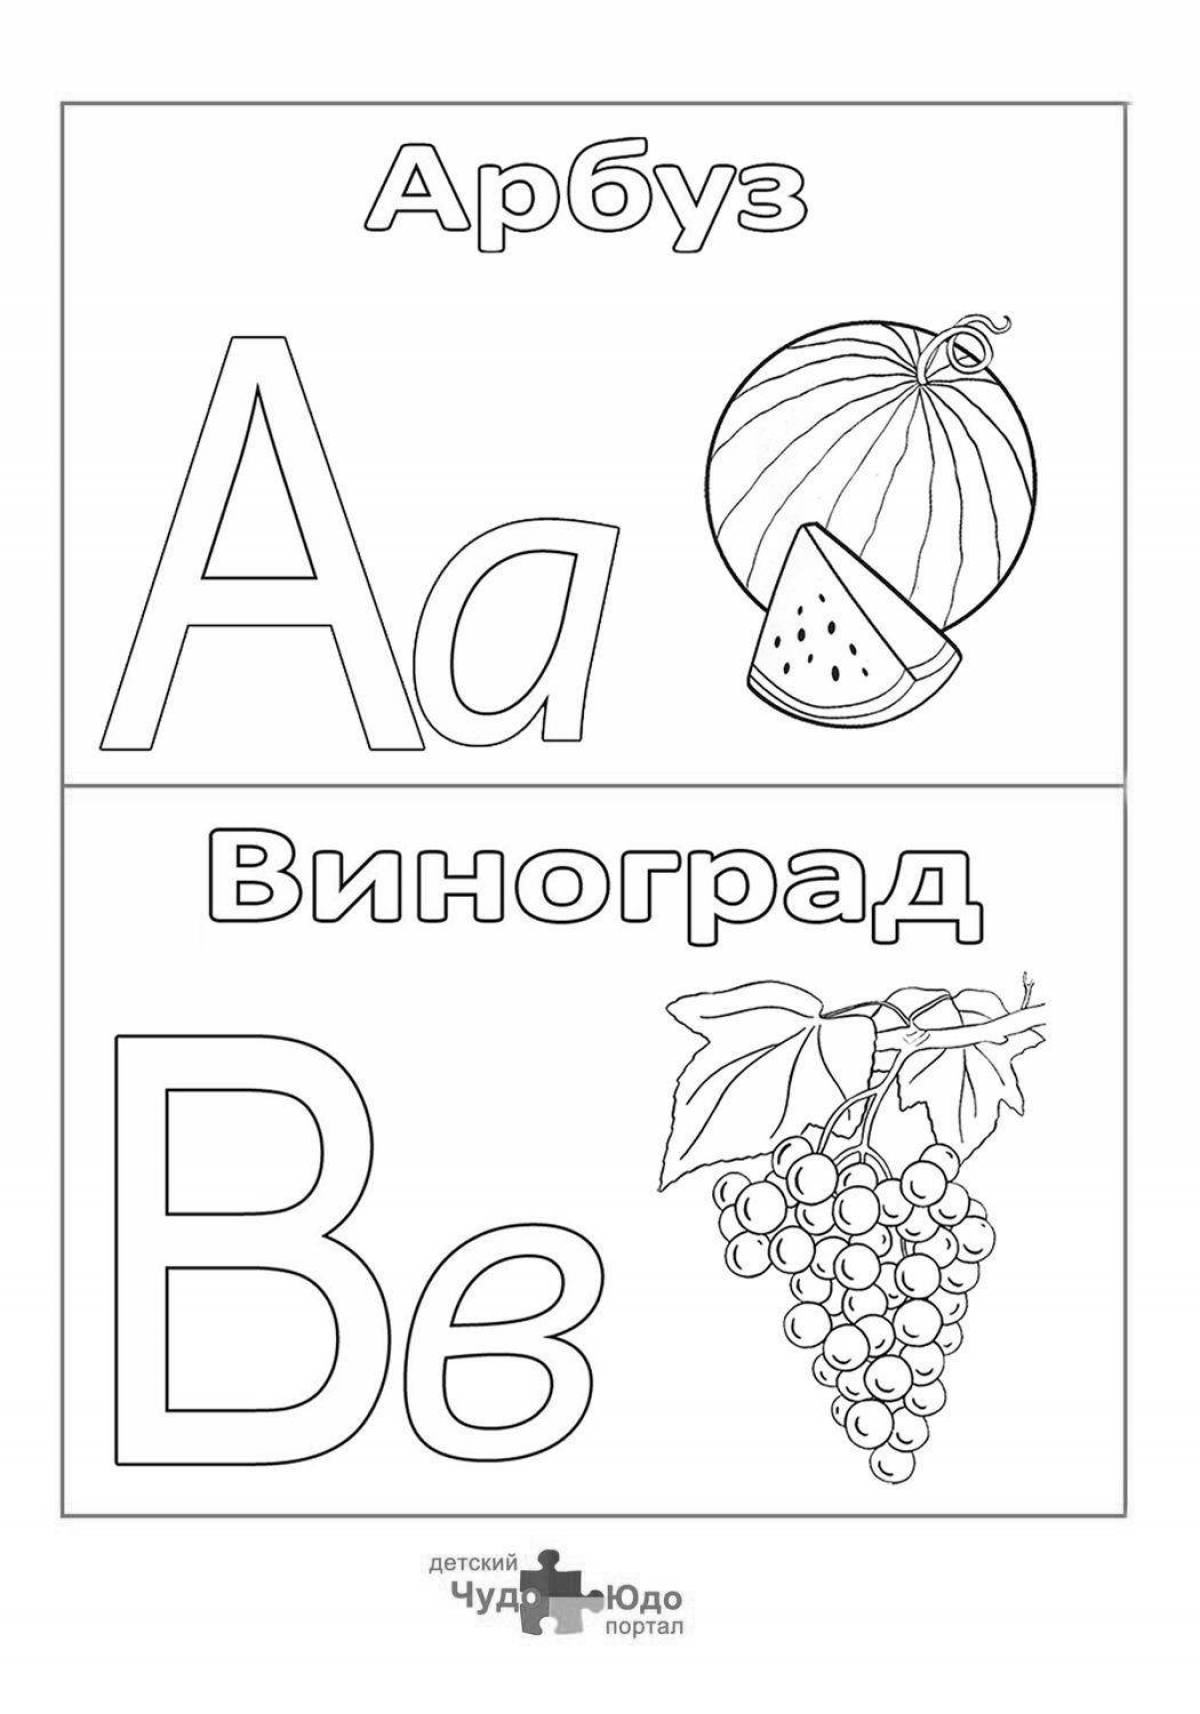 Bright laura alphabet page for kids